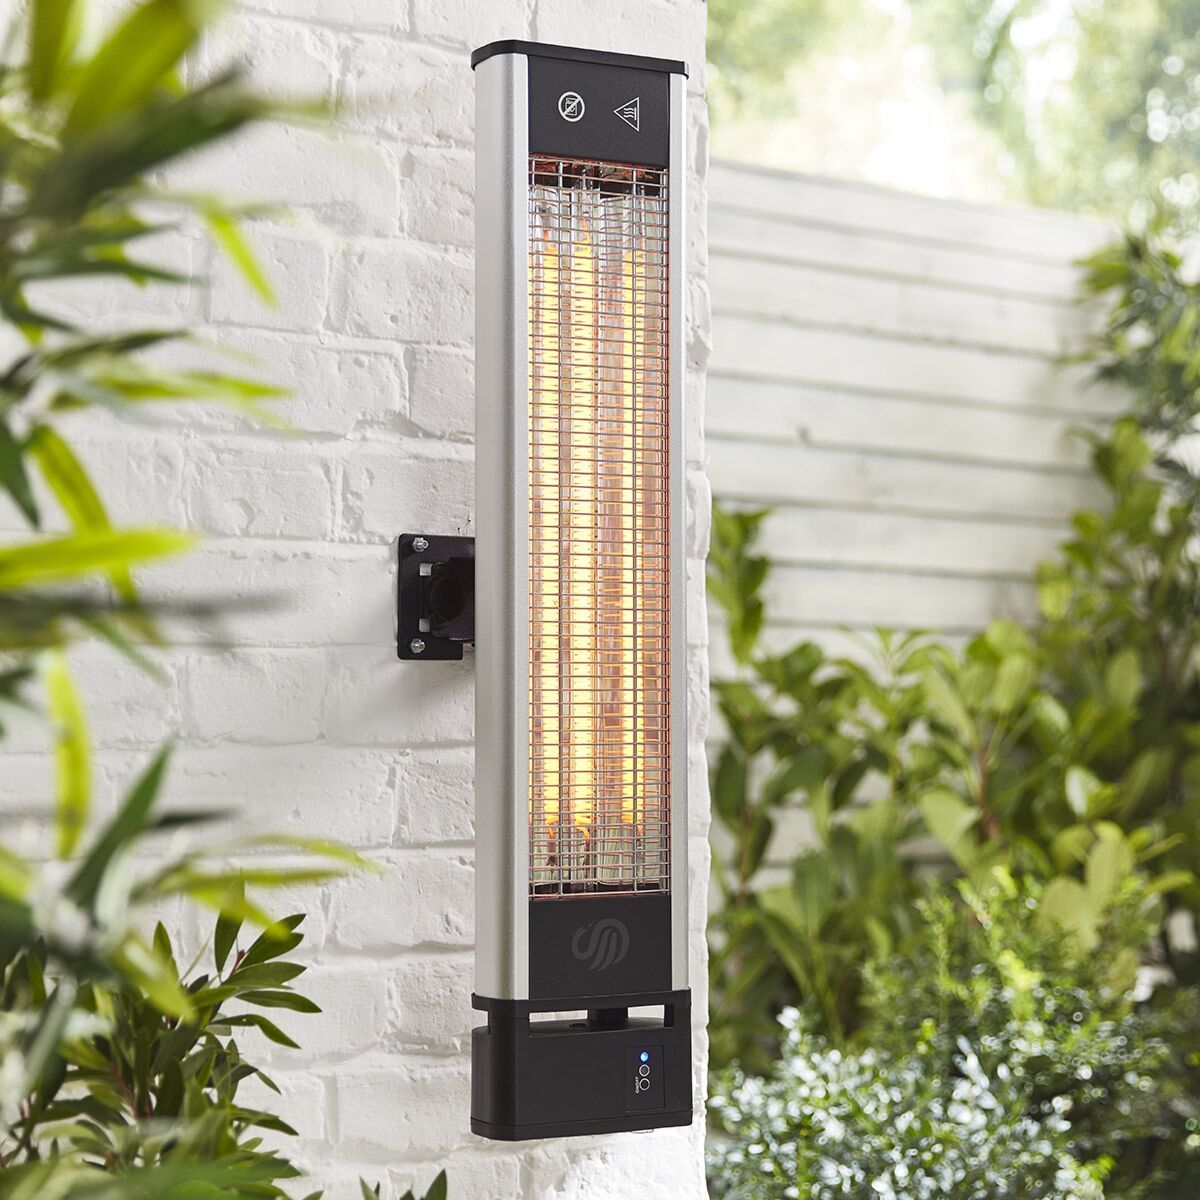 Best Patio Heaters To In The Uk For, Electric Patio Heater Covers Argos